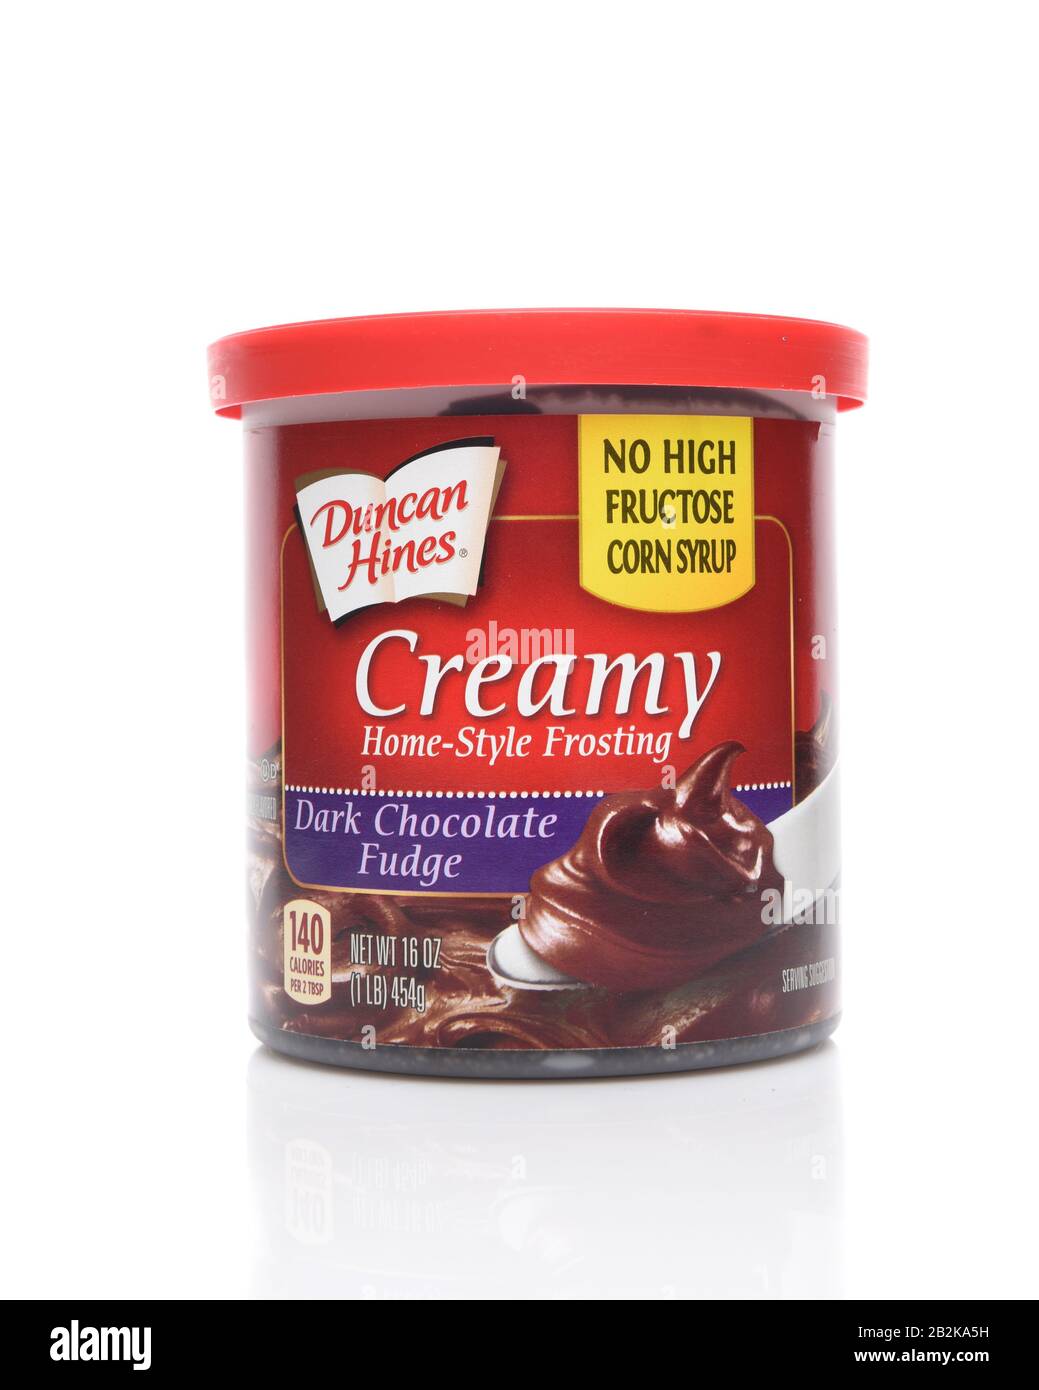 IRVINE, CALIFORNIA - AUGUST 14, 2019: A tub of Duncan Hines Dark Chocolate Fudge Creamy Home Style Frosting. Stock Photo